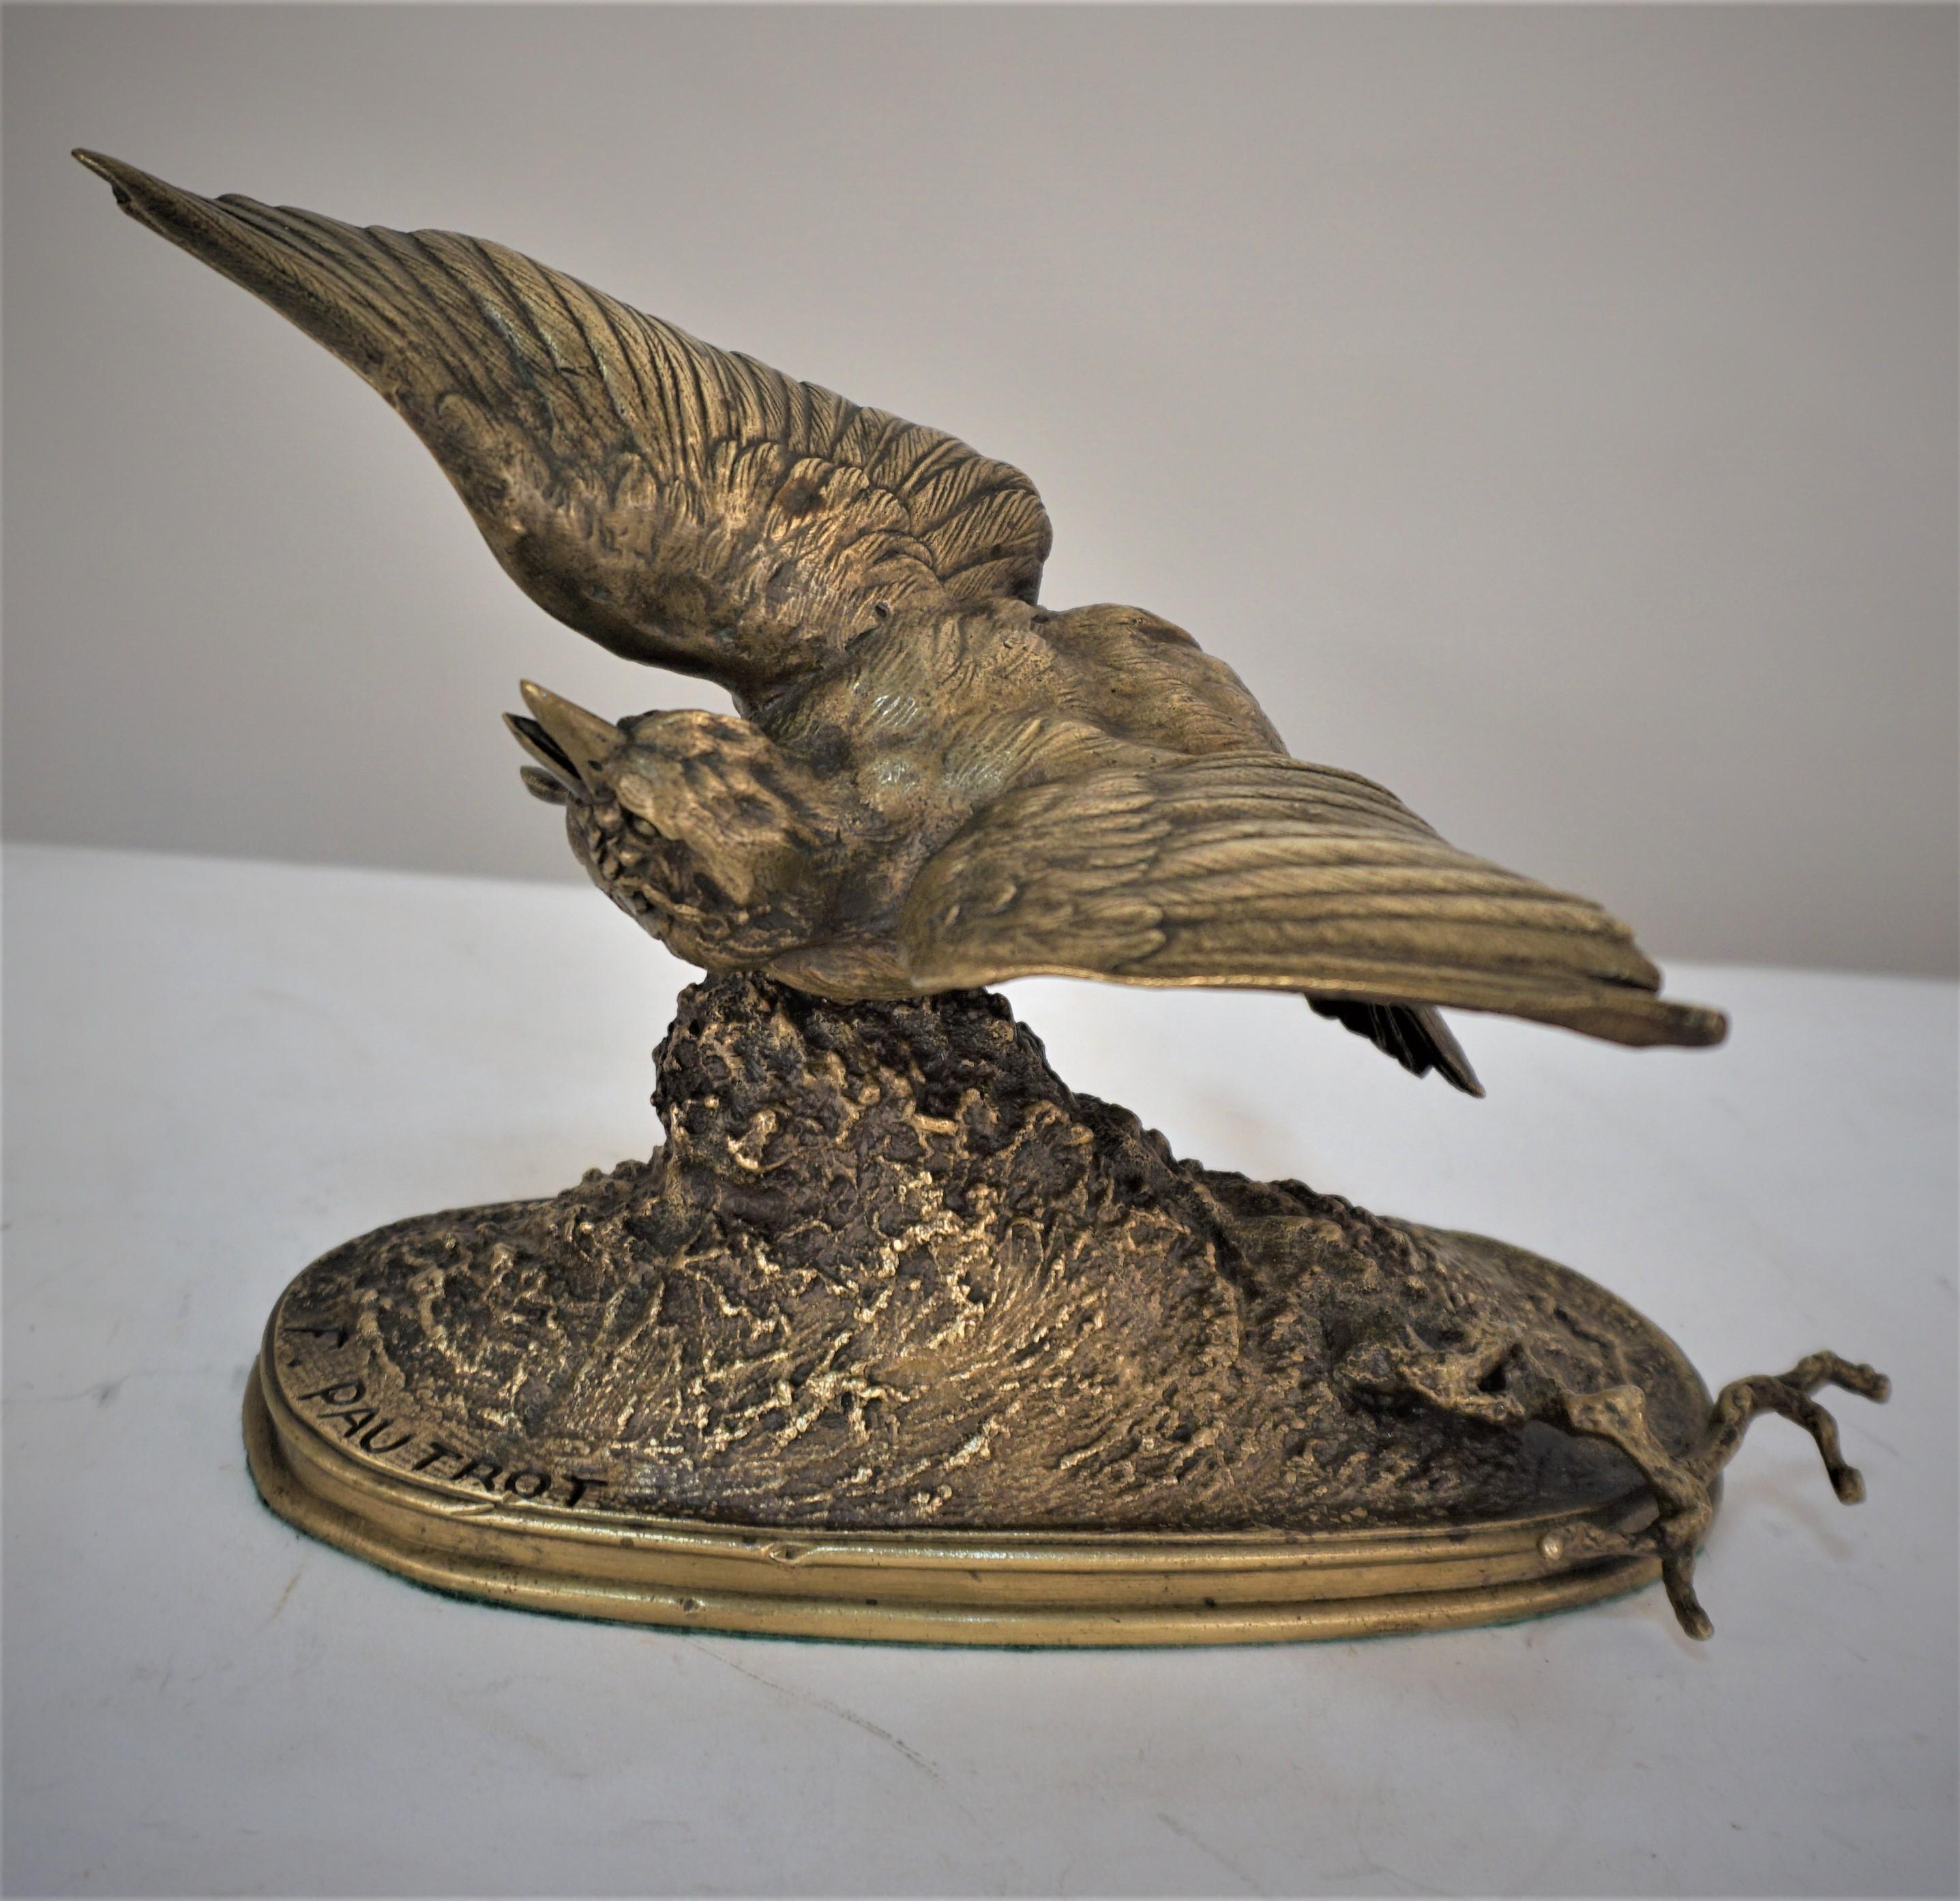 19th century brown-gold patinated bronze sculpture of bird on a tree stump.